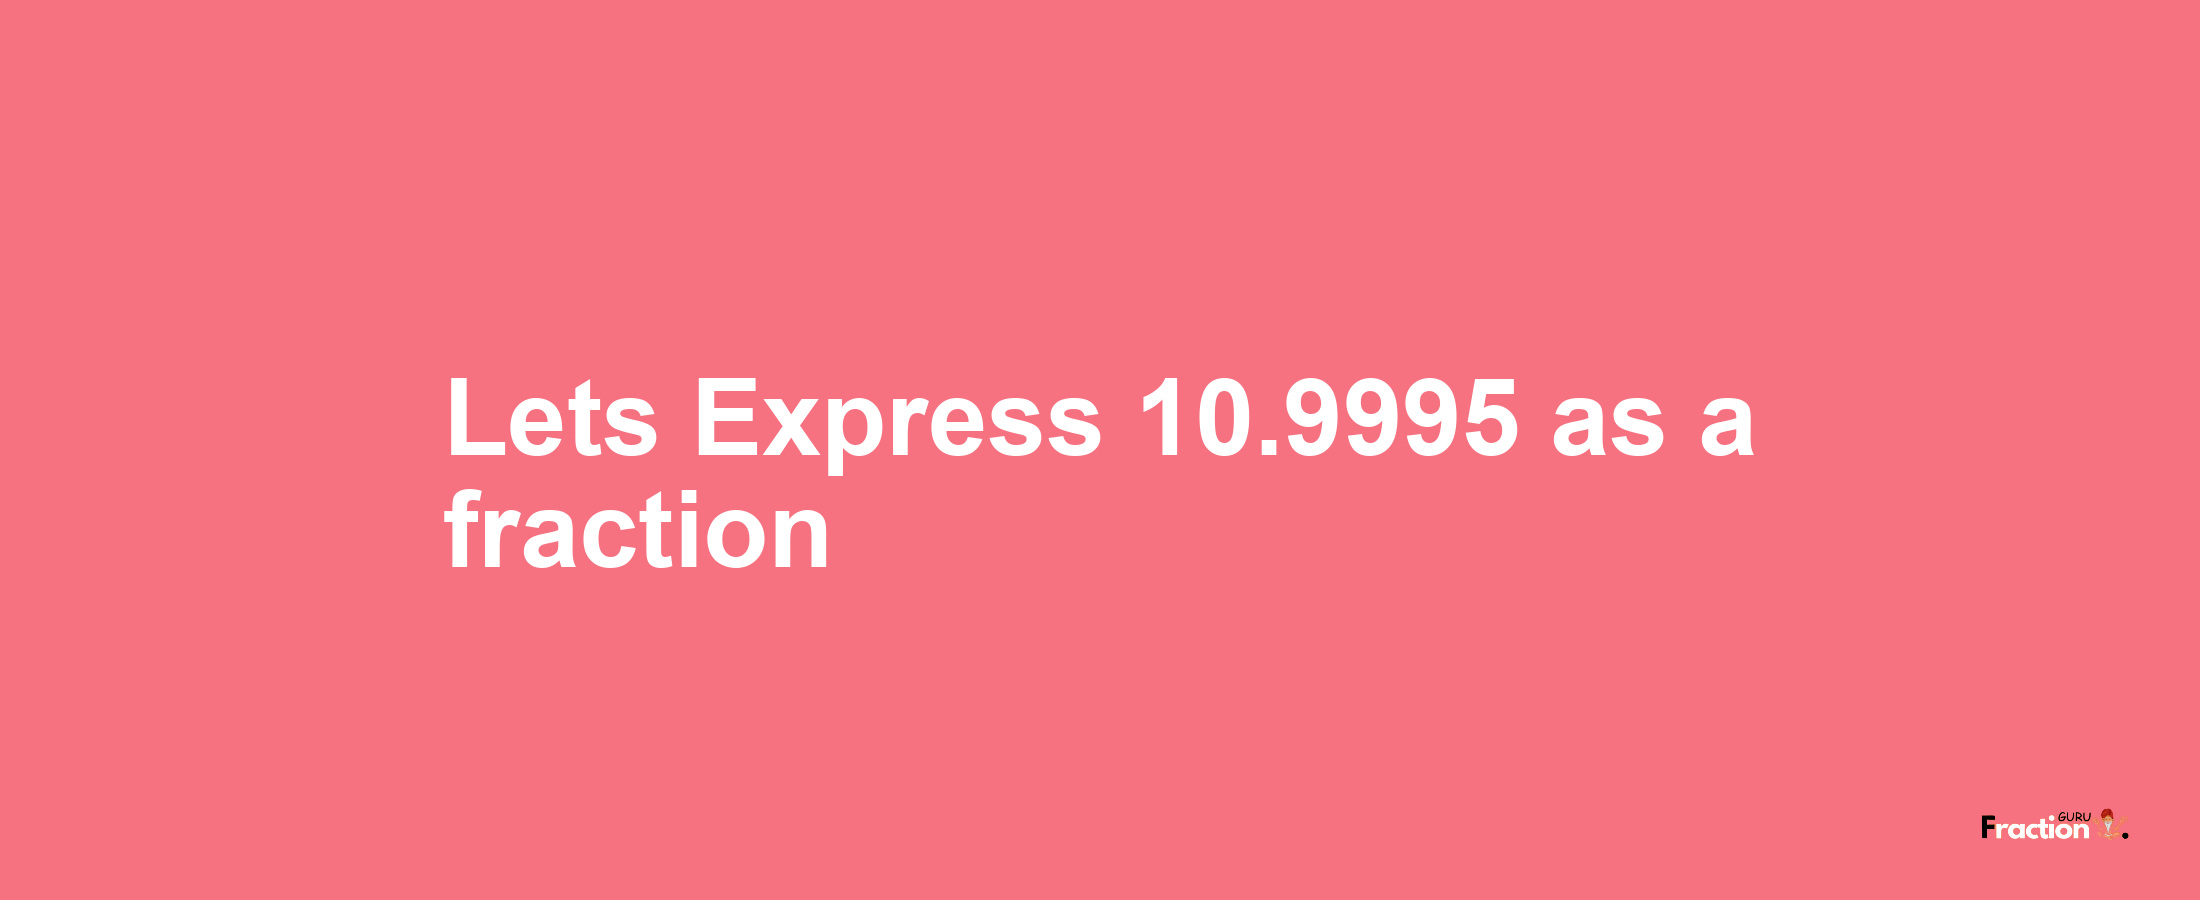 Lets Express 10.9995 as afraction